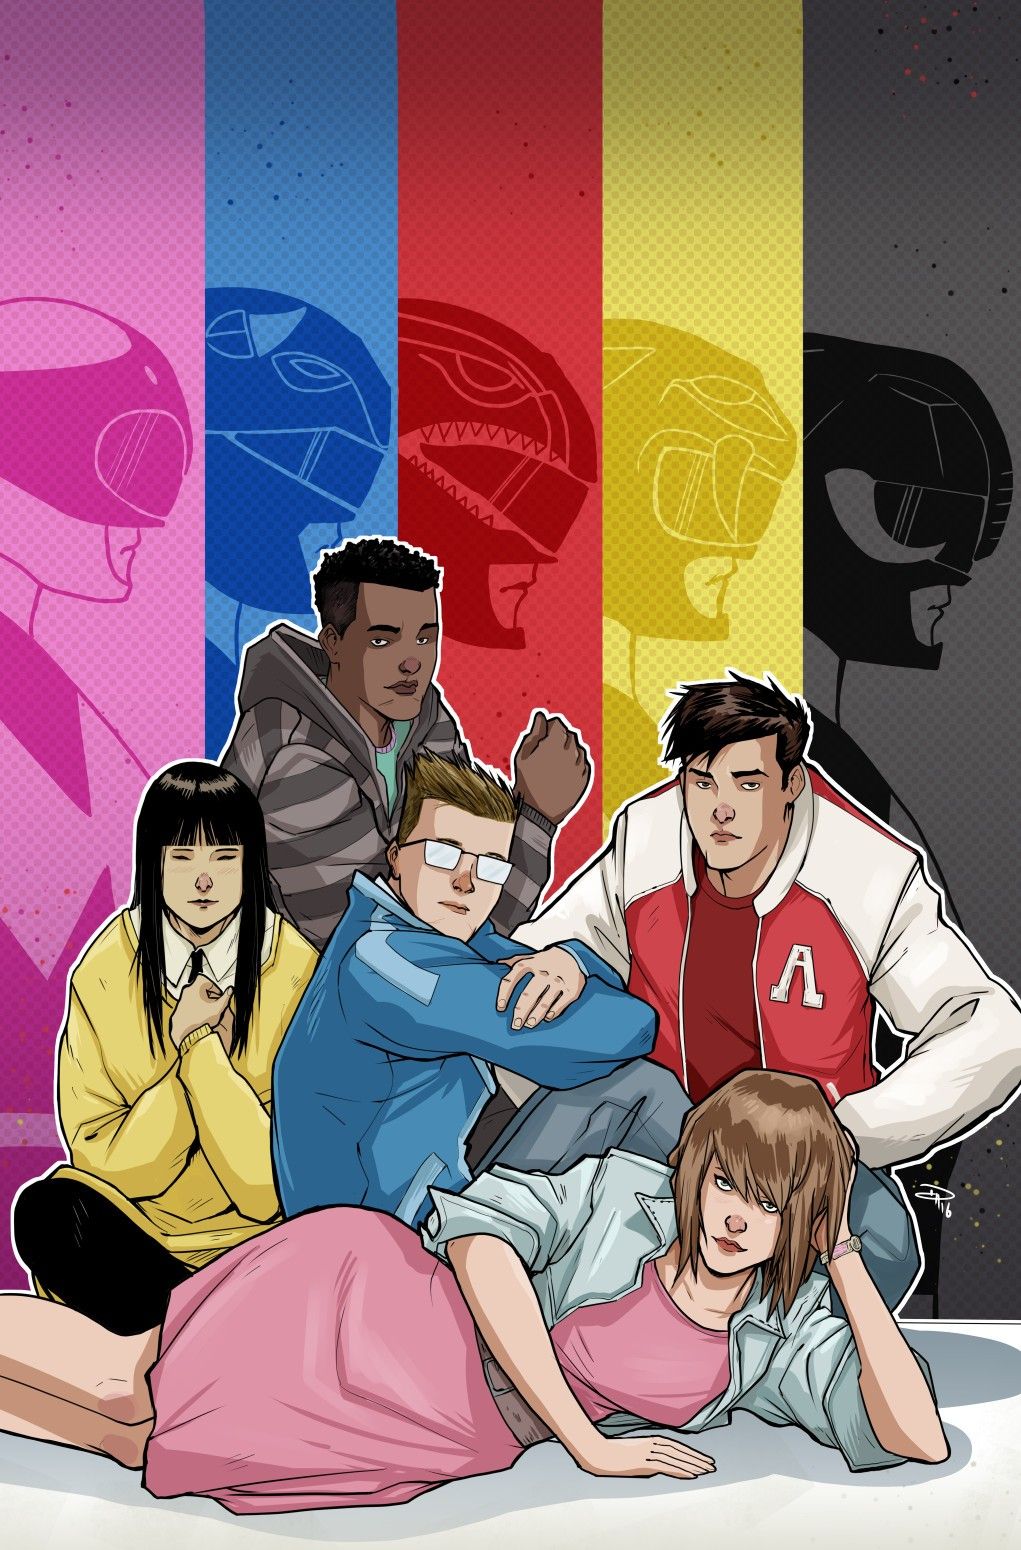 It's Morphin' Time with these Power Rangers wallpaper